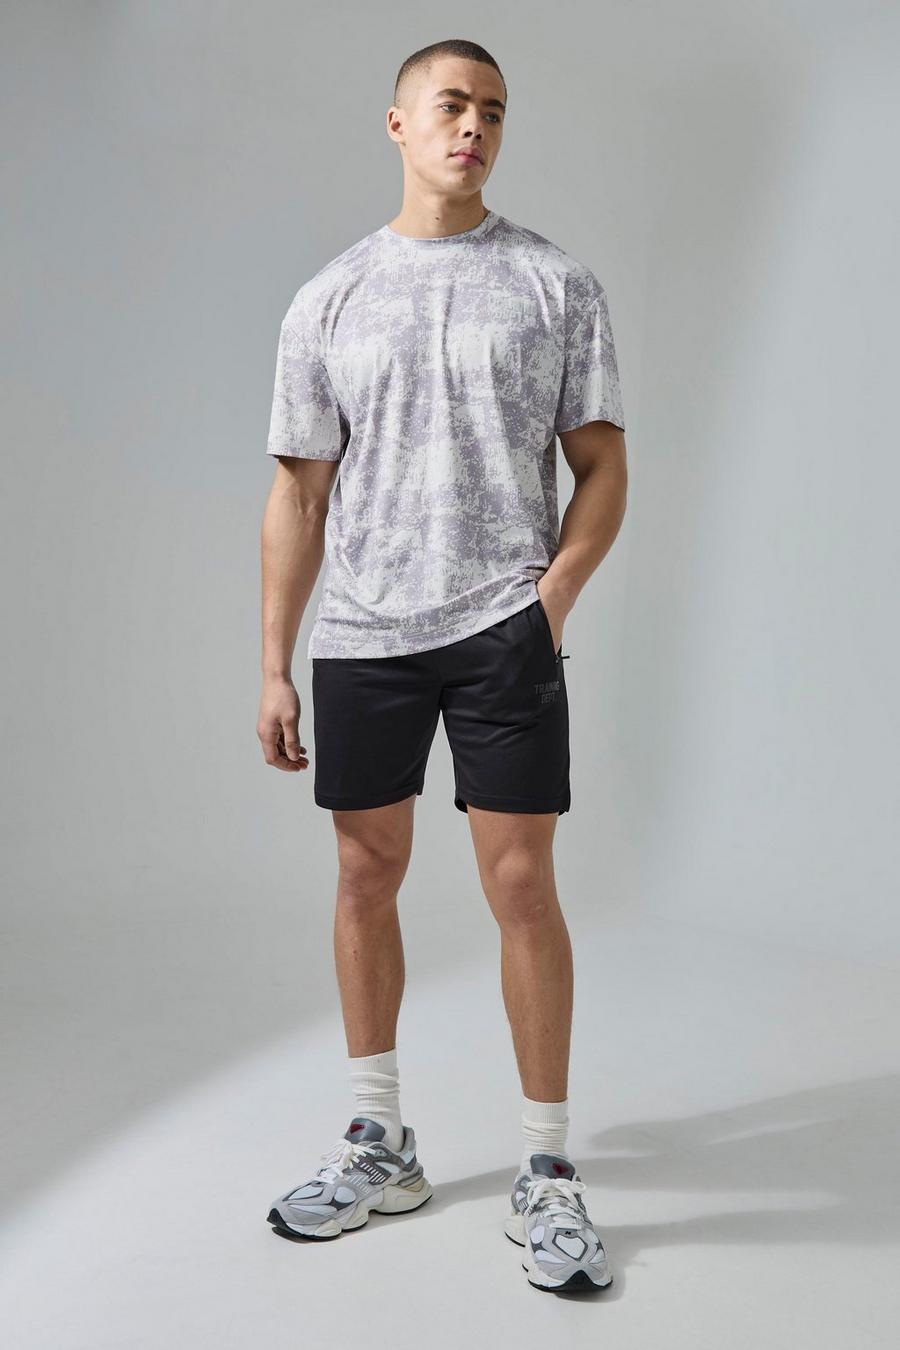 abstract-print Active Training Dept Camo Oversized T-shirt Short Set image number 1